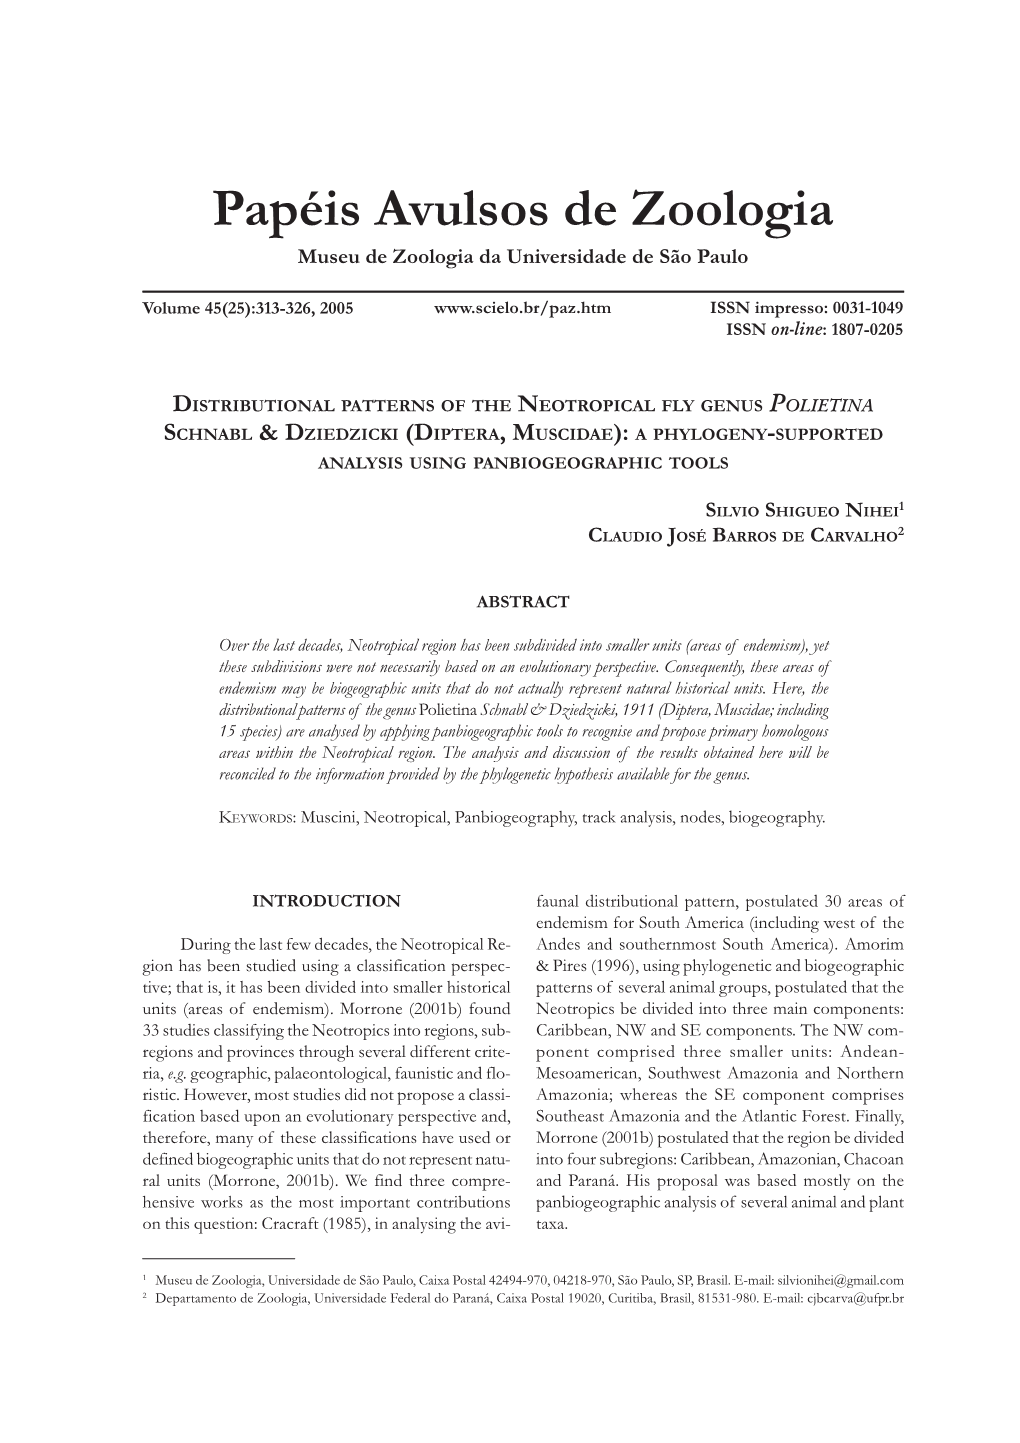 Distributional Patterns of the Neotropical Fly Genus Polietina Schnabl & Dziedzicki (Diptera, Muscidae): a Phylogeny-Supported Analysis Using Panbiogeographic Tools